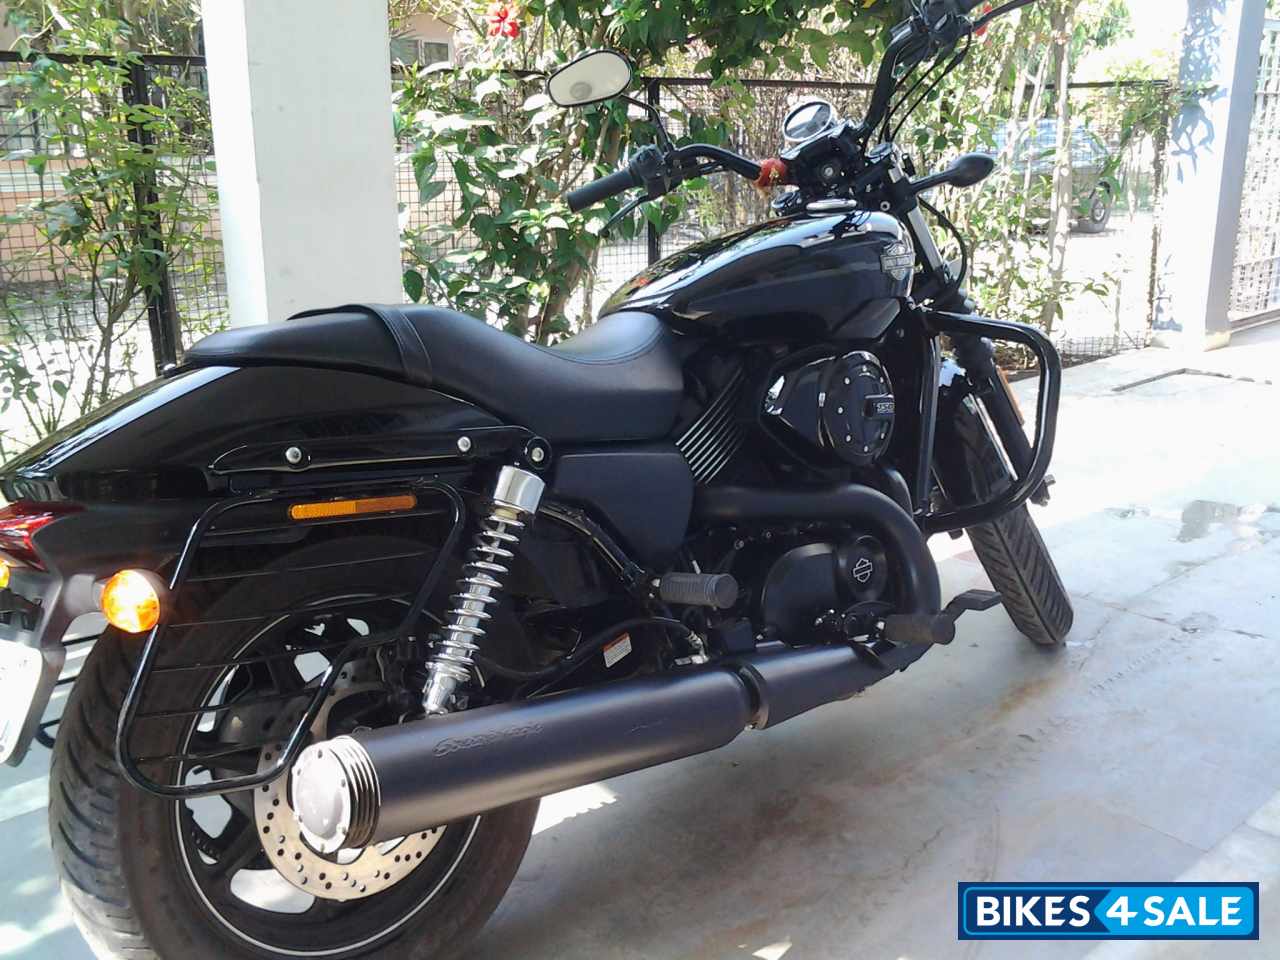 Used Harley Davidson Street 750 For Sale In Indore Id 135826 Shiny Black Colour Bikes4sale